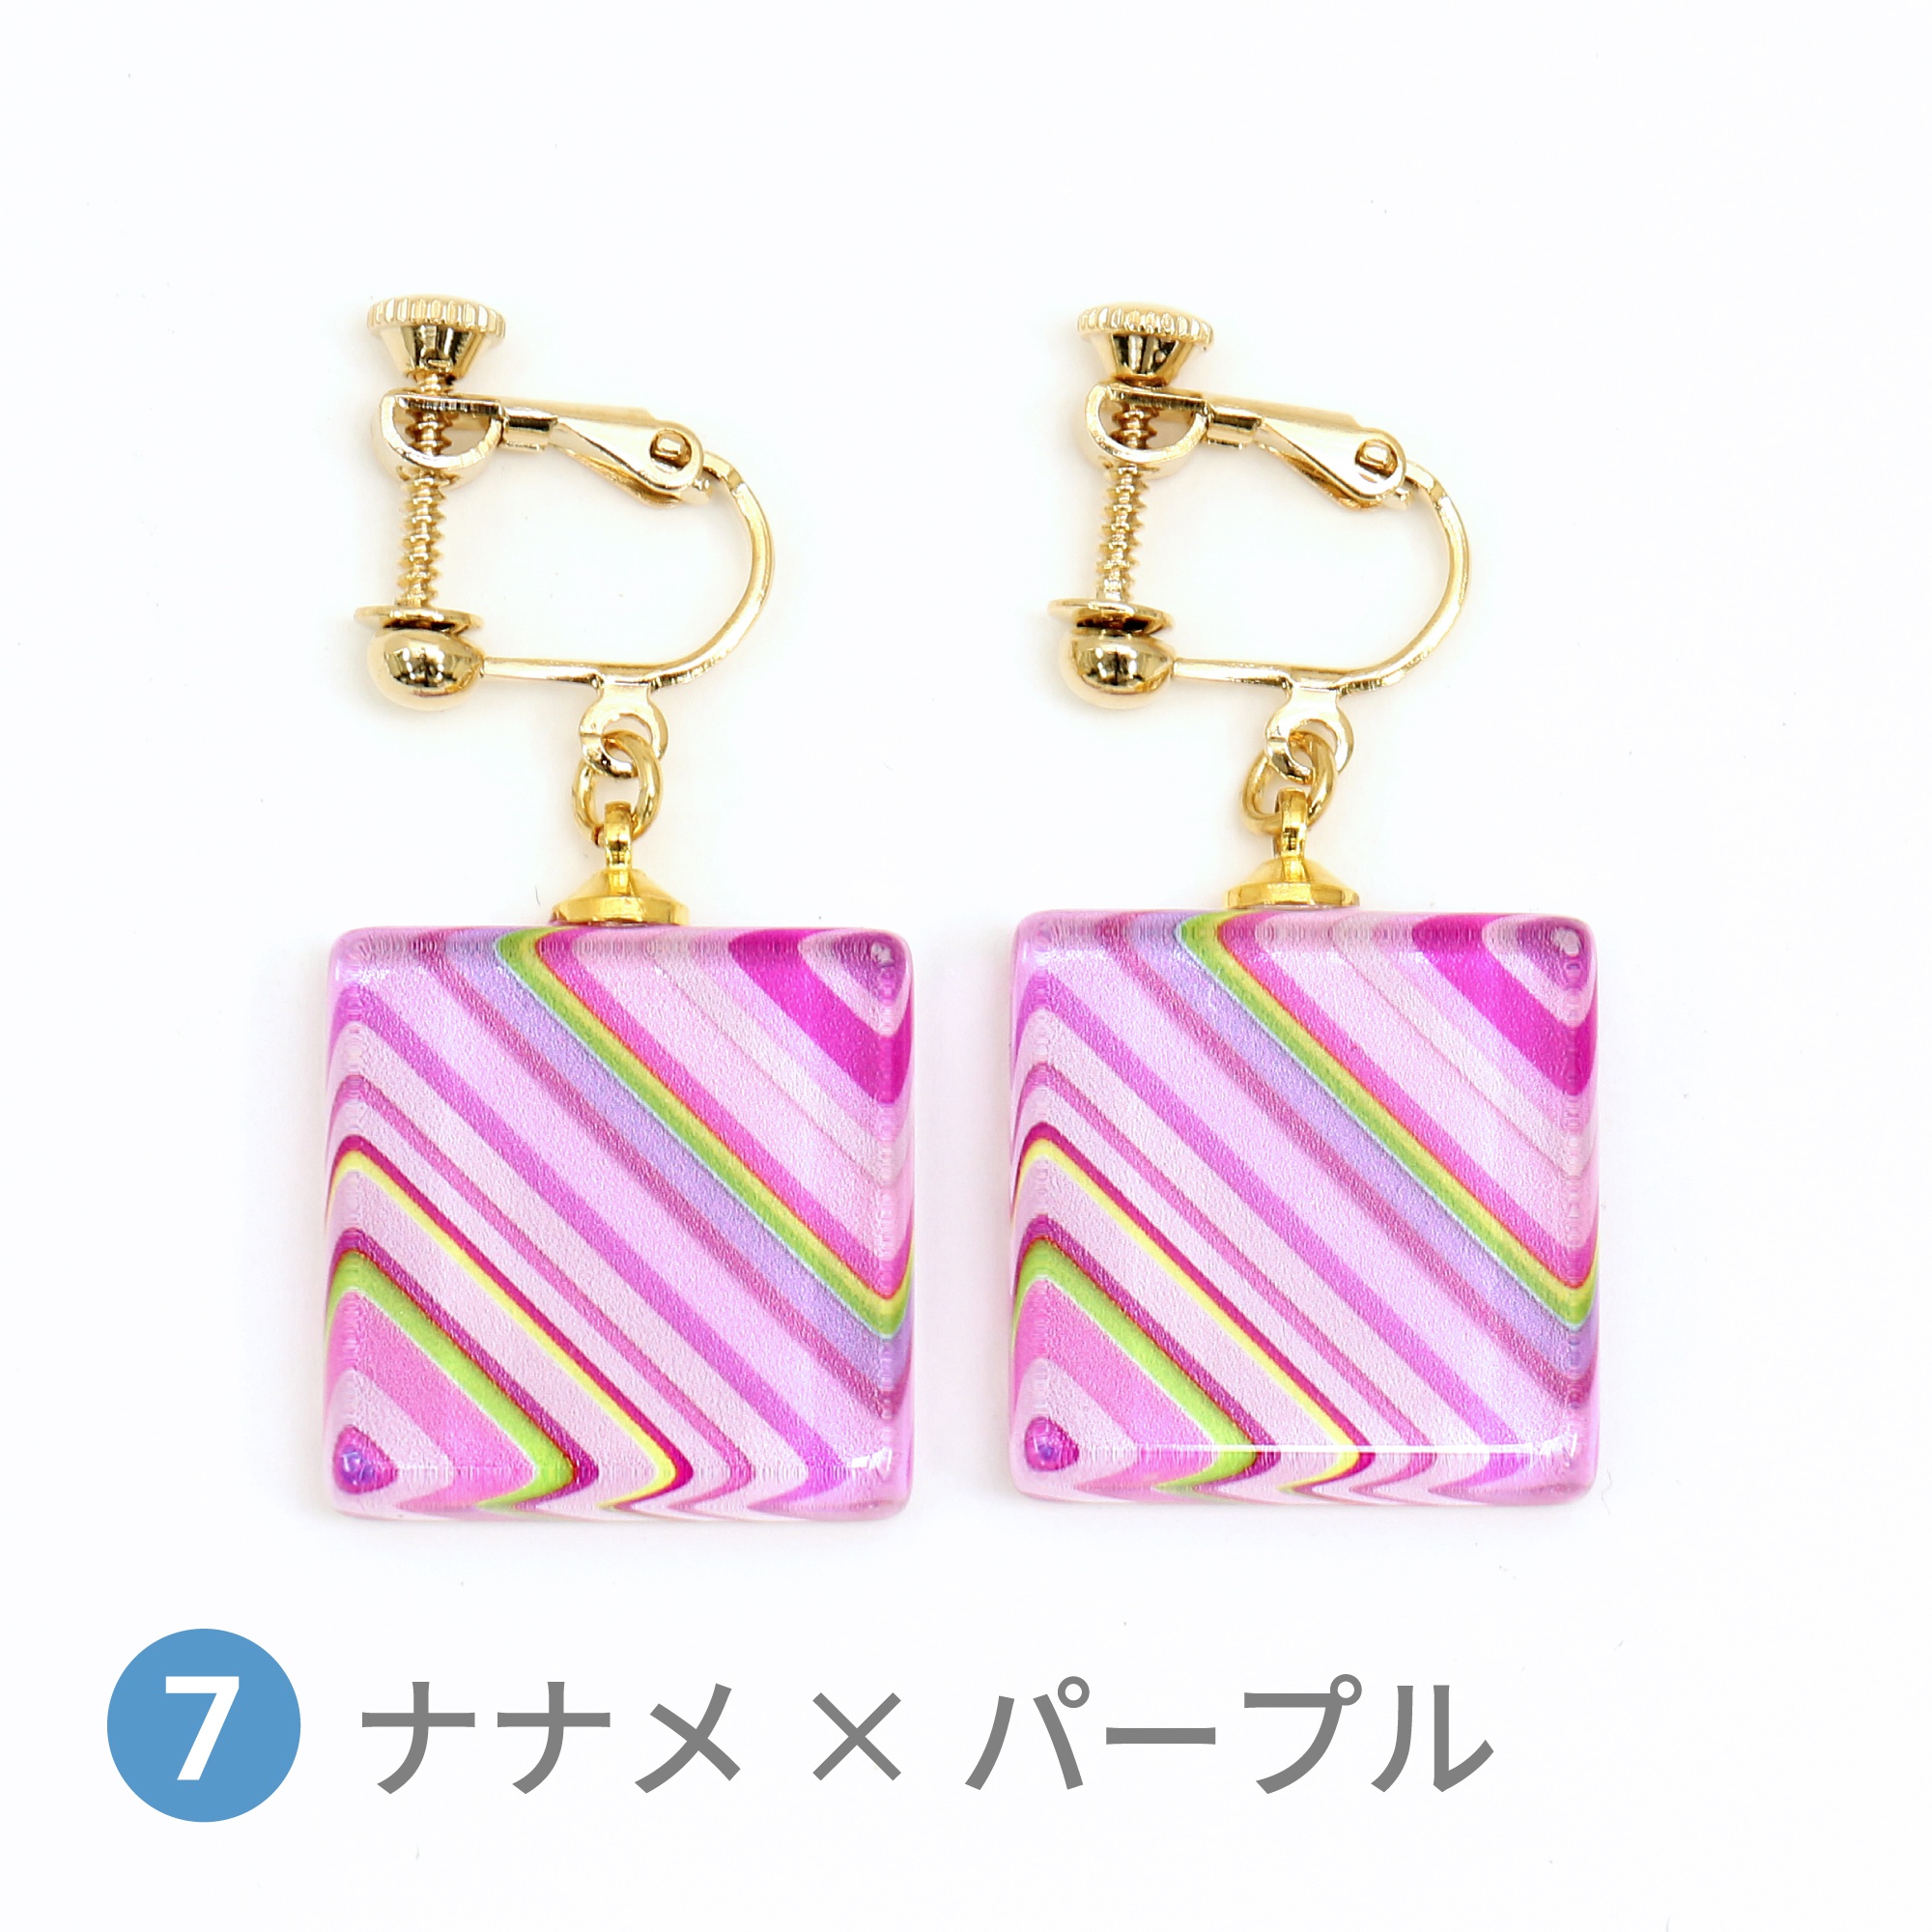 Glass accessories Earring SPEED diagonal&purple square shape